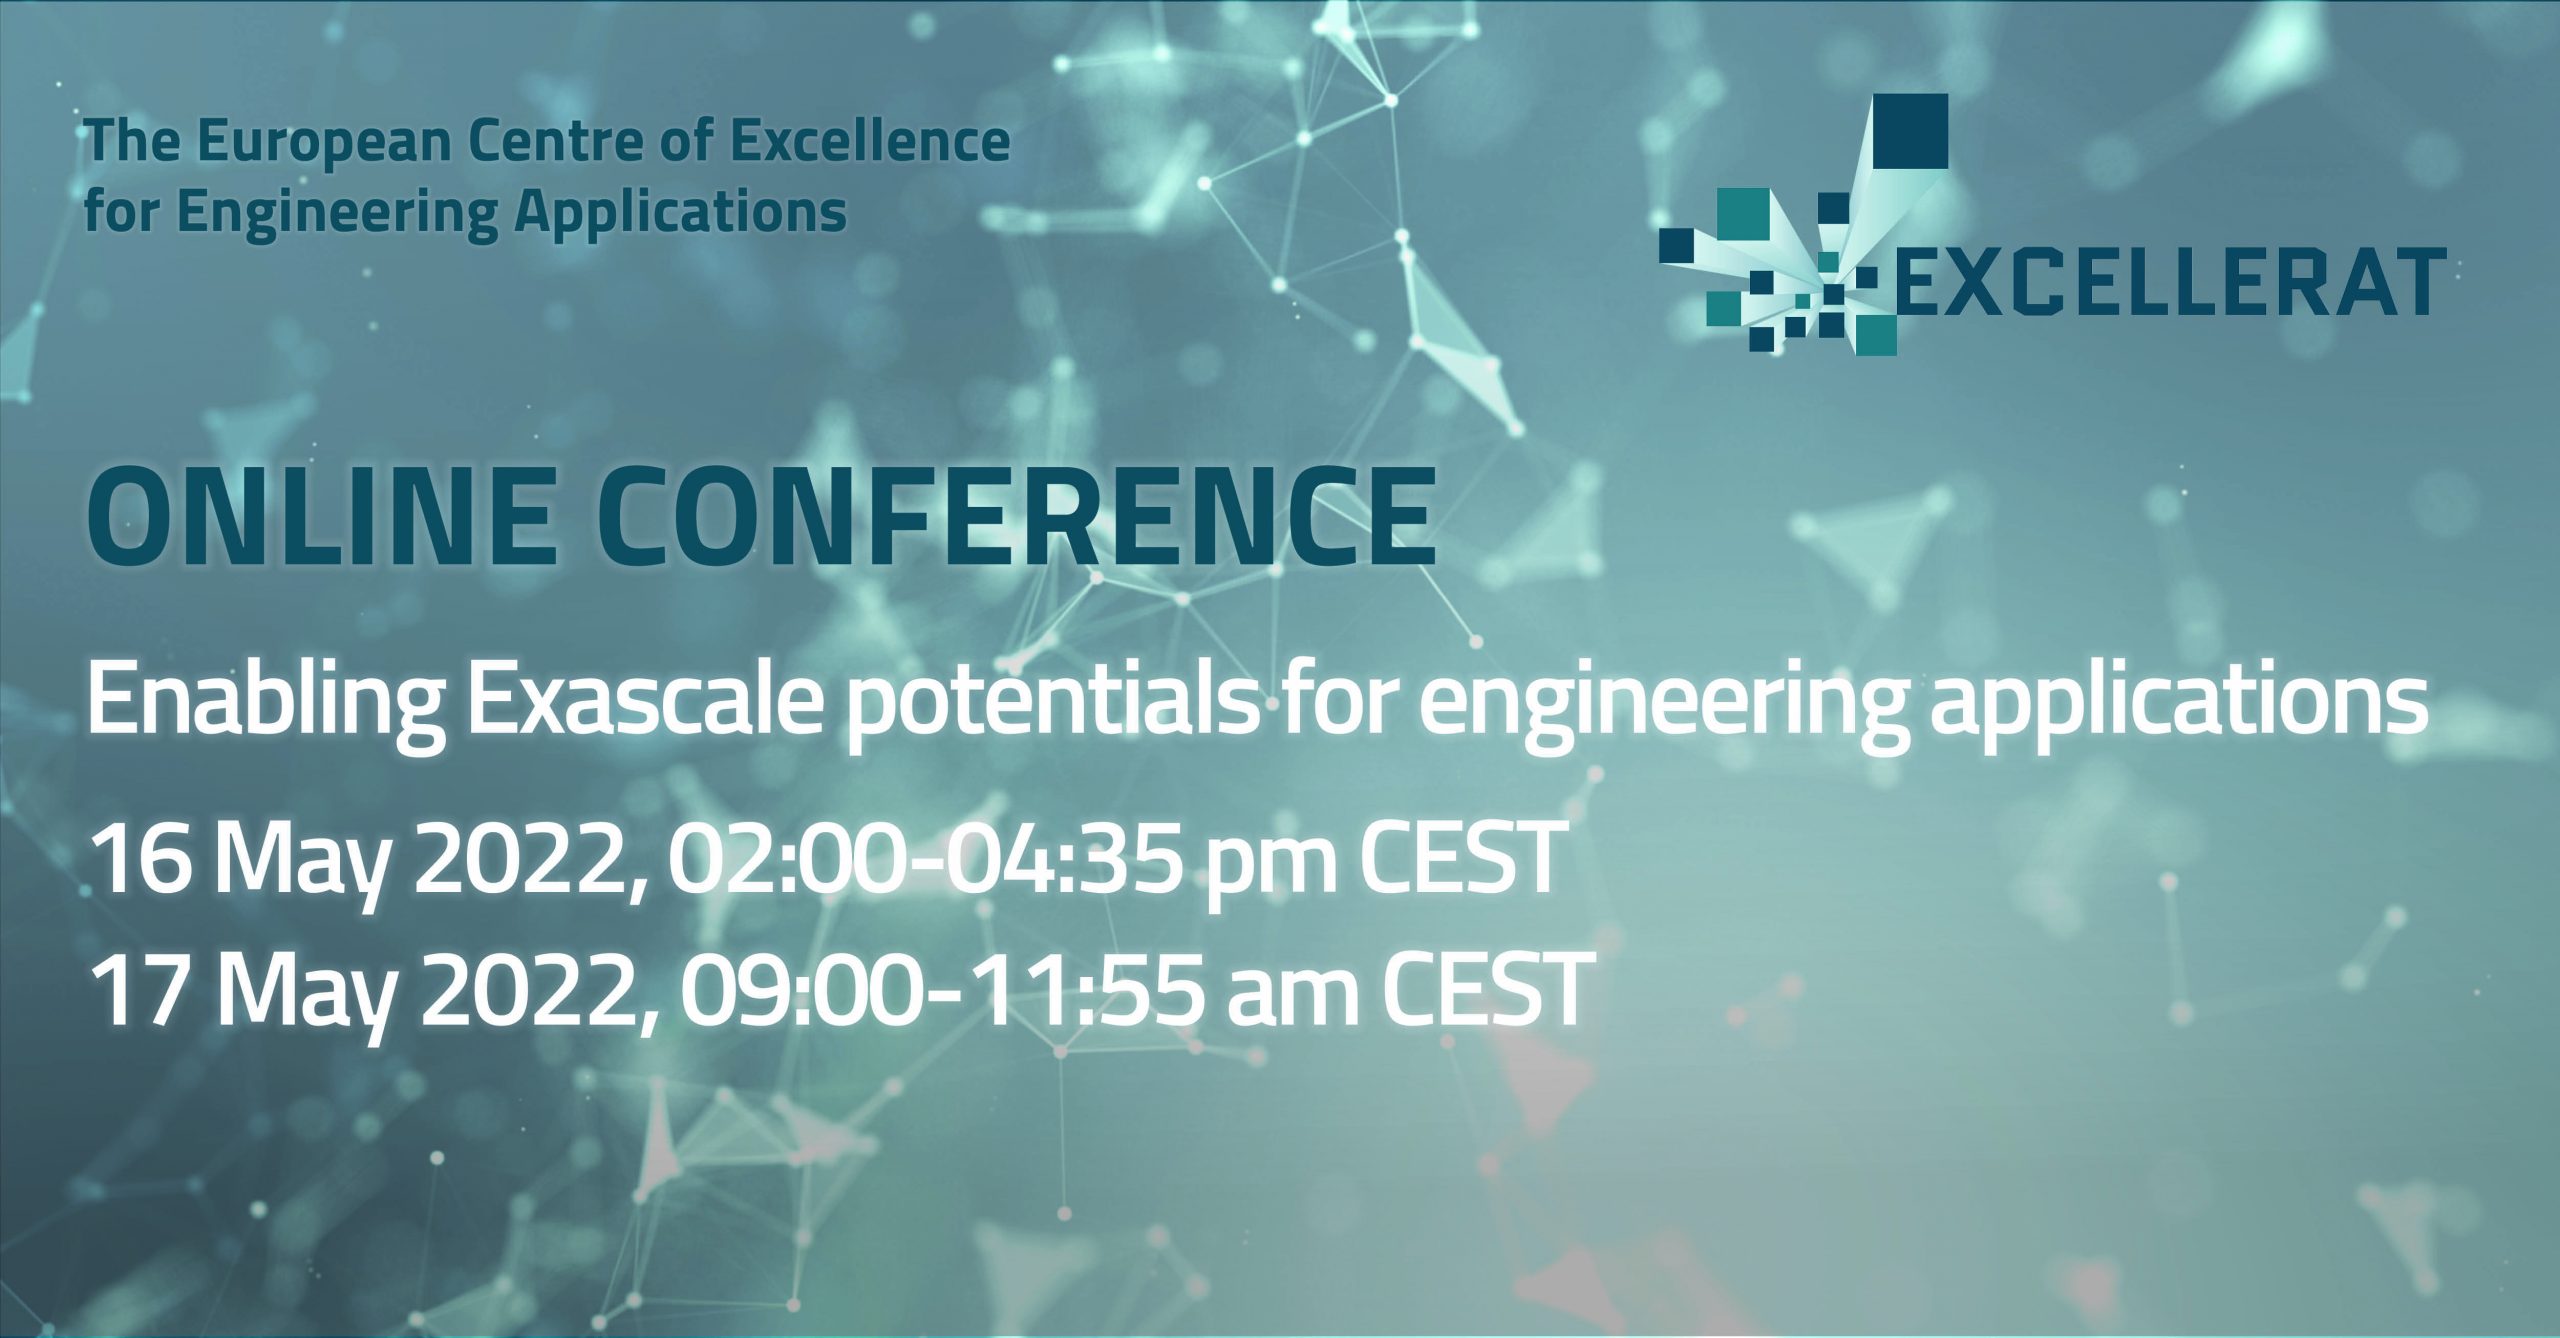 EXCELLERAT: Enabling Exascale potentials for engineering applications